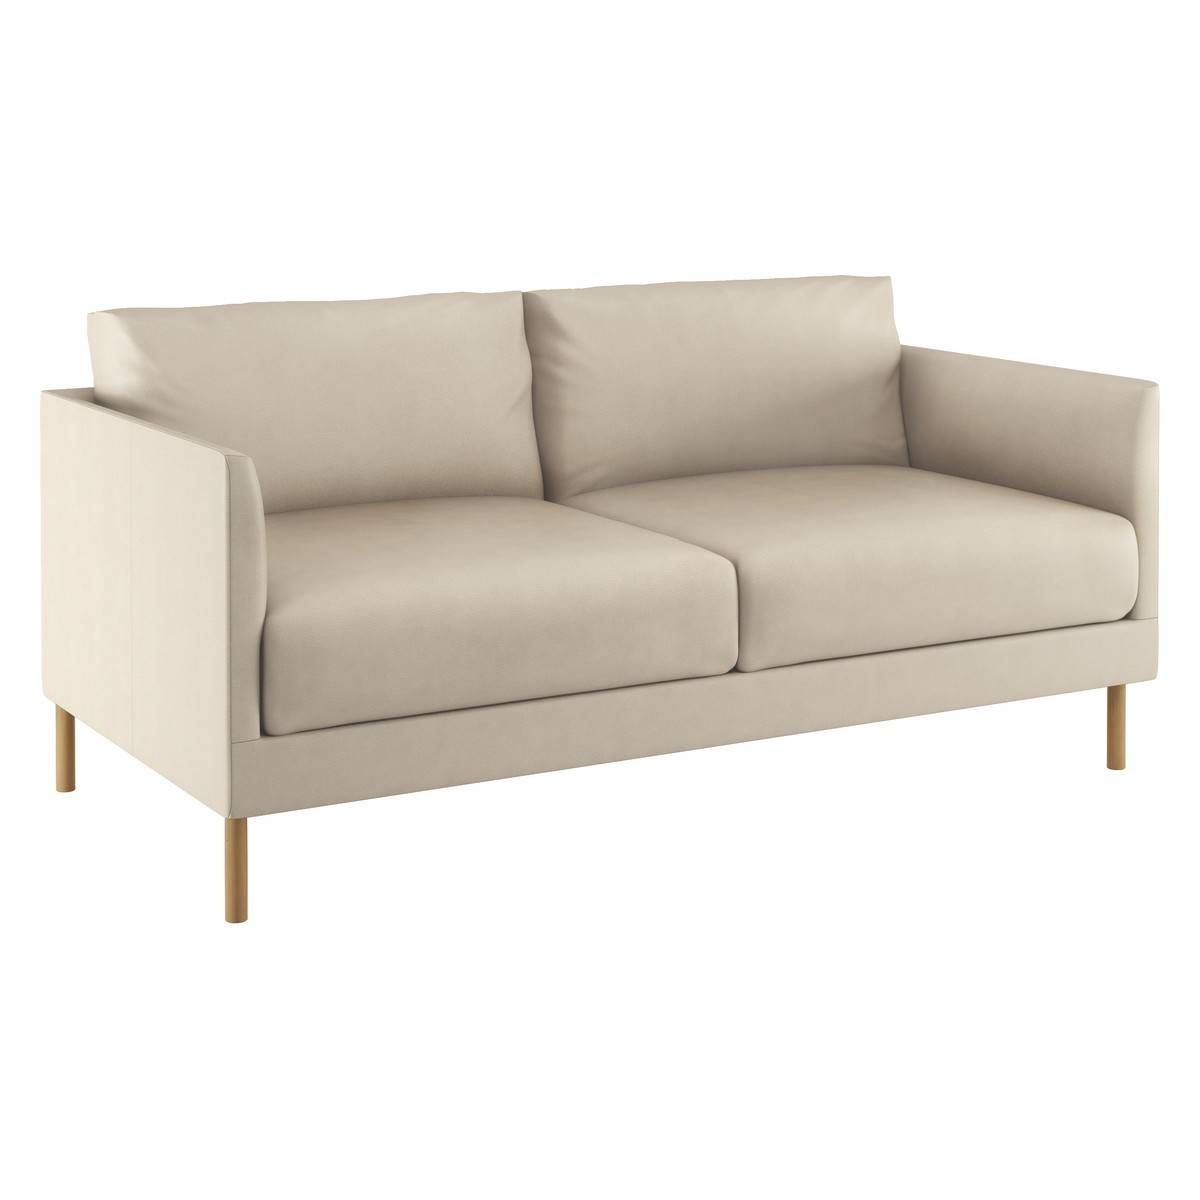 Hyde Cream Leather 2 Seater Sofa, Wooden Legs | Buy Now At Habitat Uk Intended For Wood Legs Sofas (View 30 of 30)